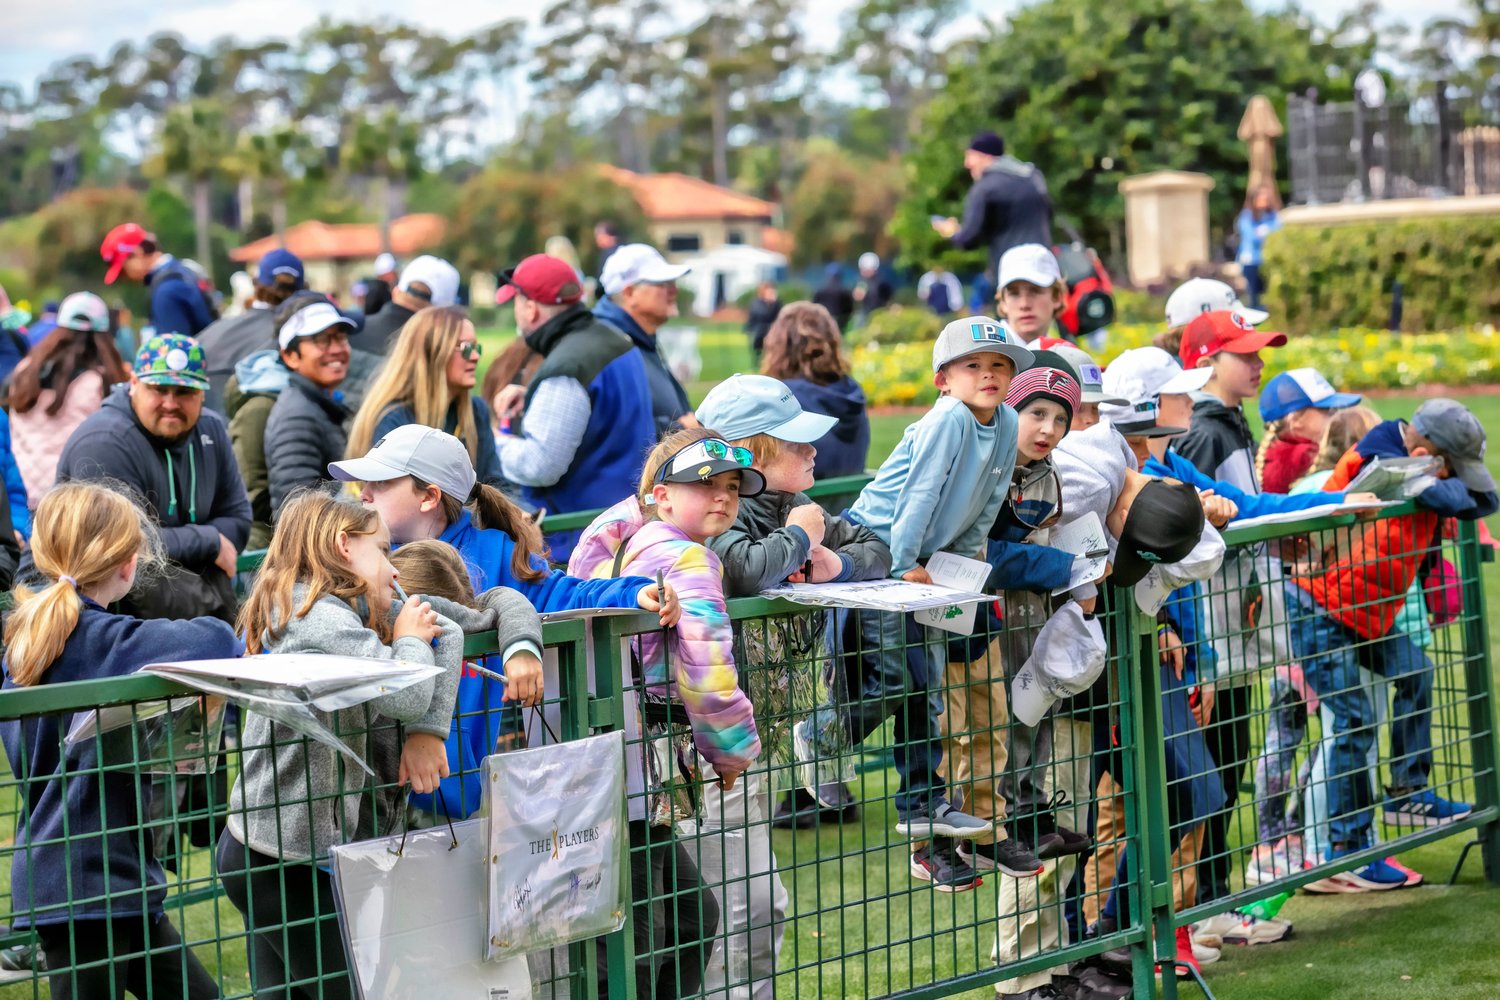 Young fans gather at TPC Sawgrass on Sunday, March 13, during THE PLAYERS Championship.